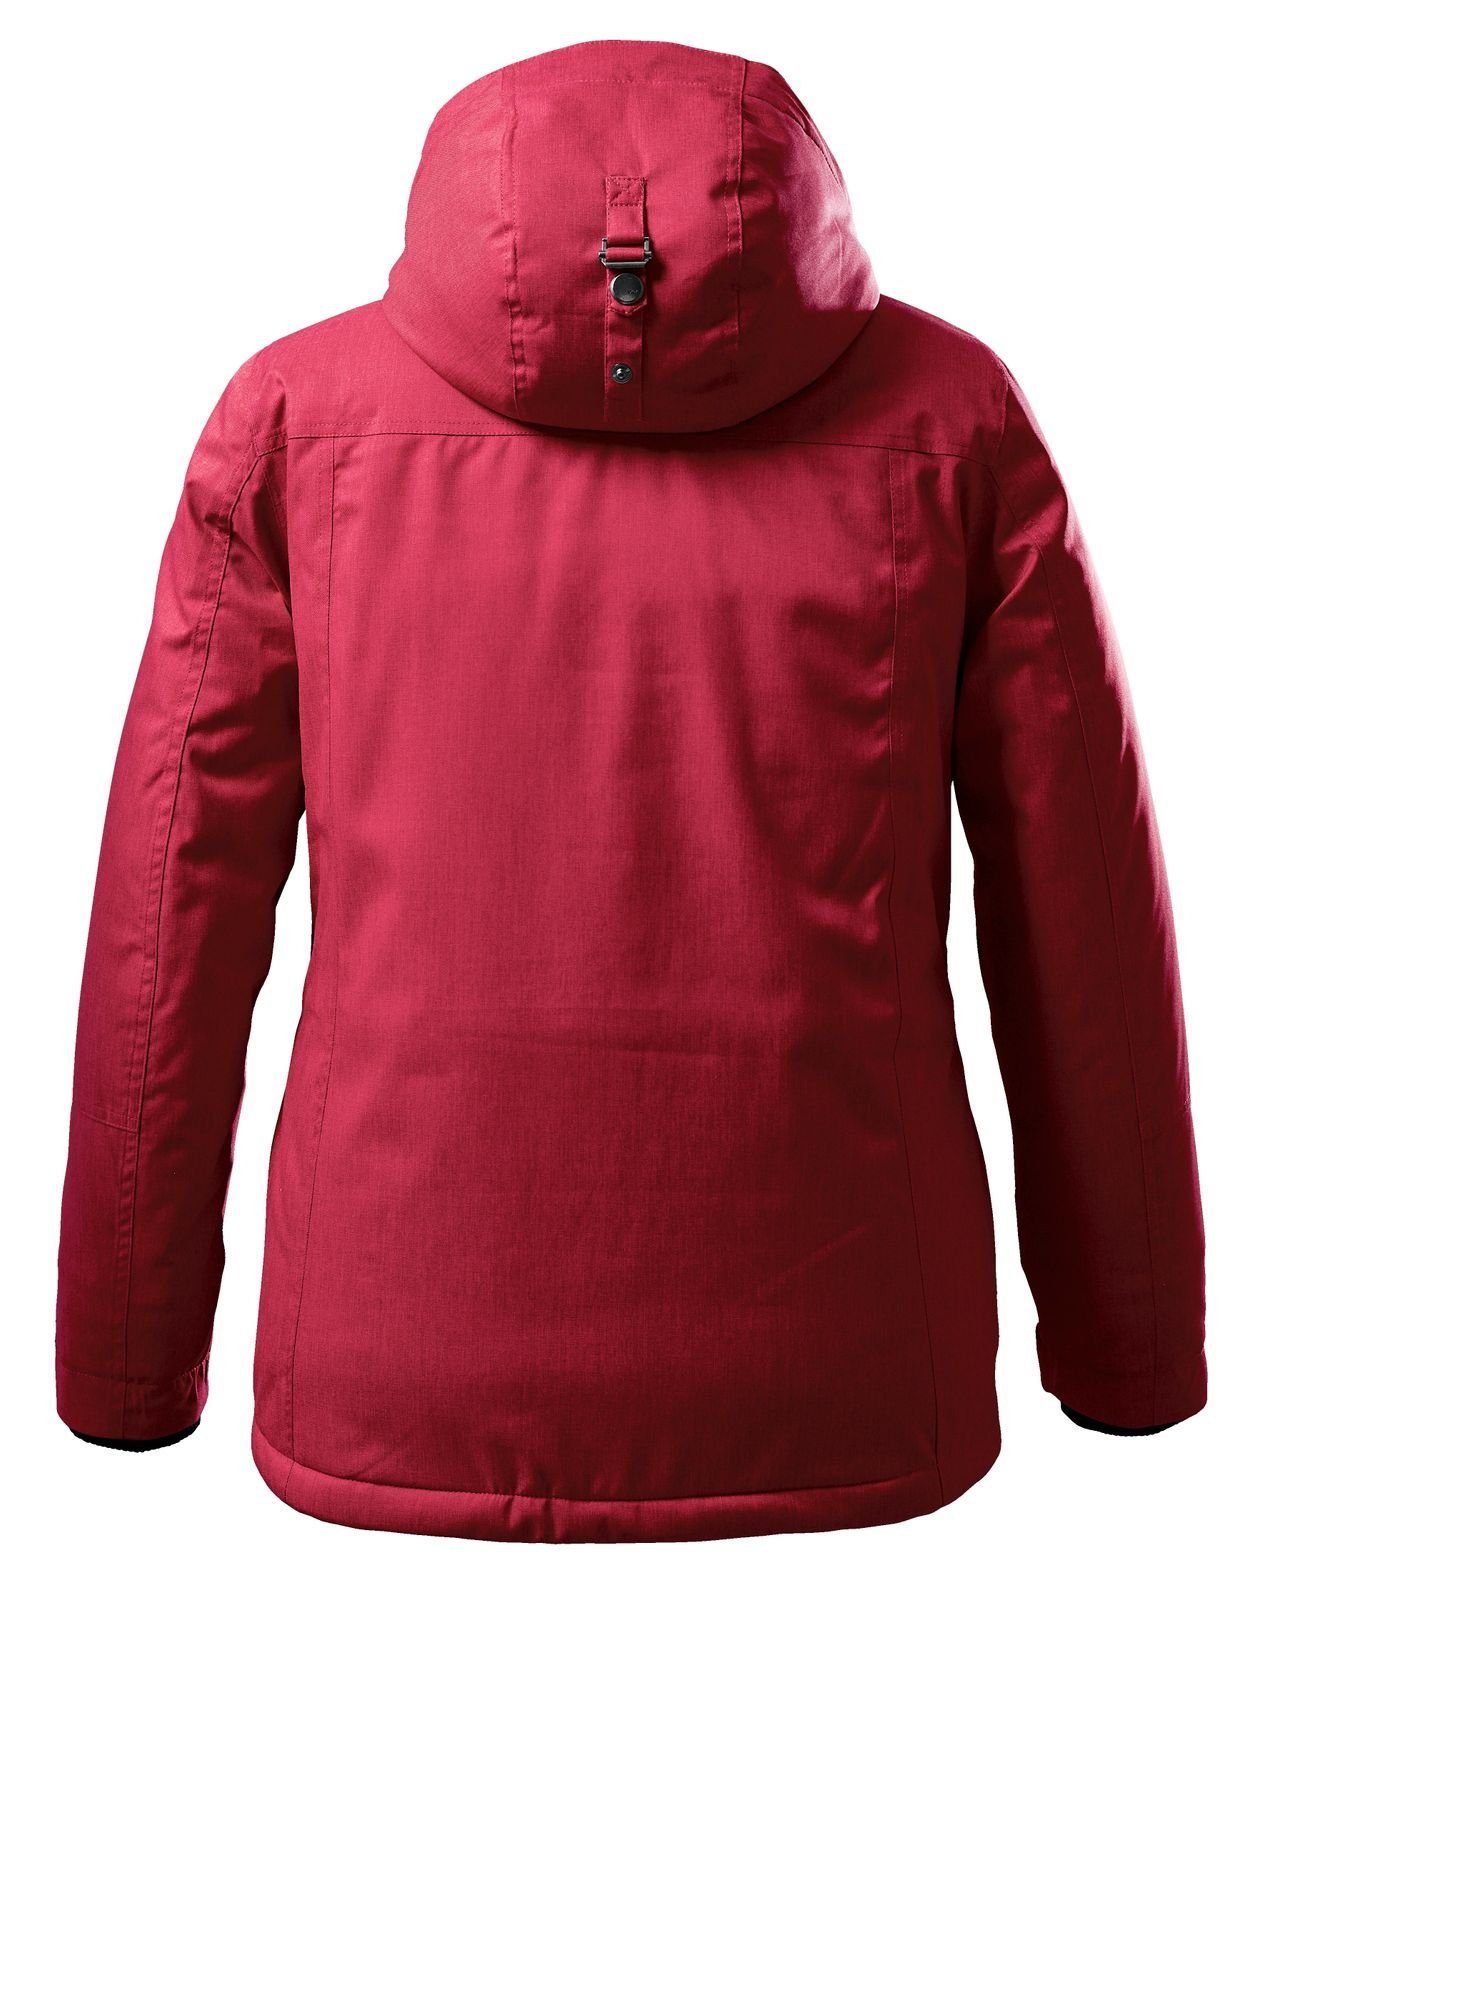 STOY Parka 37340 red deep (00405)